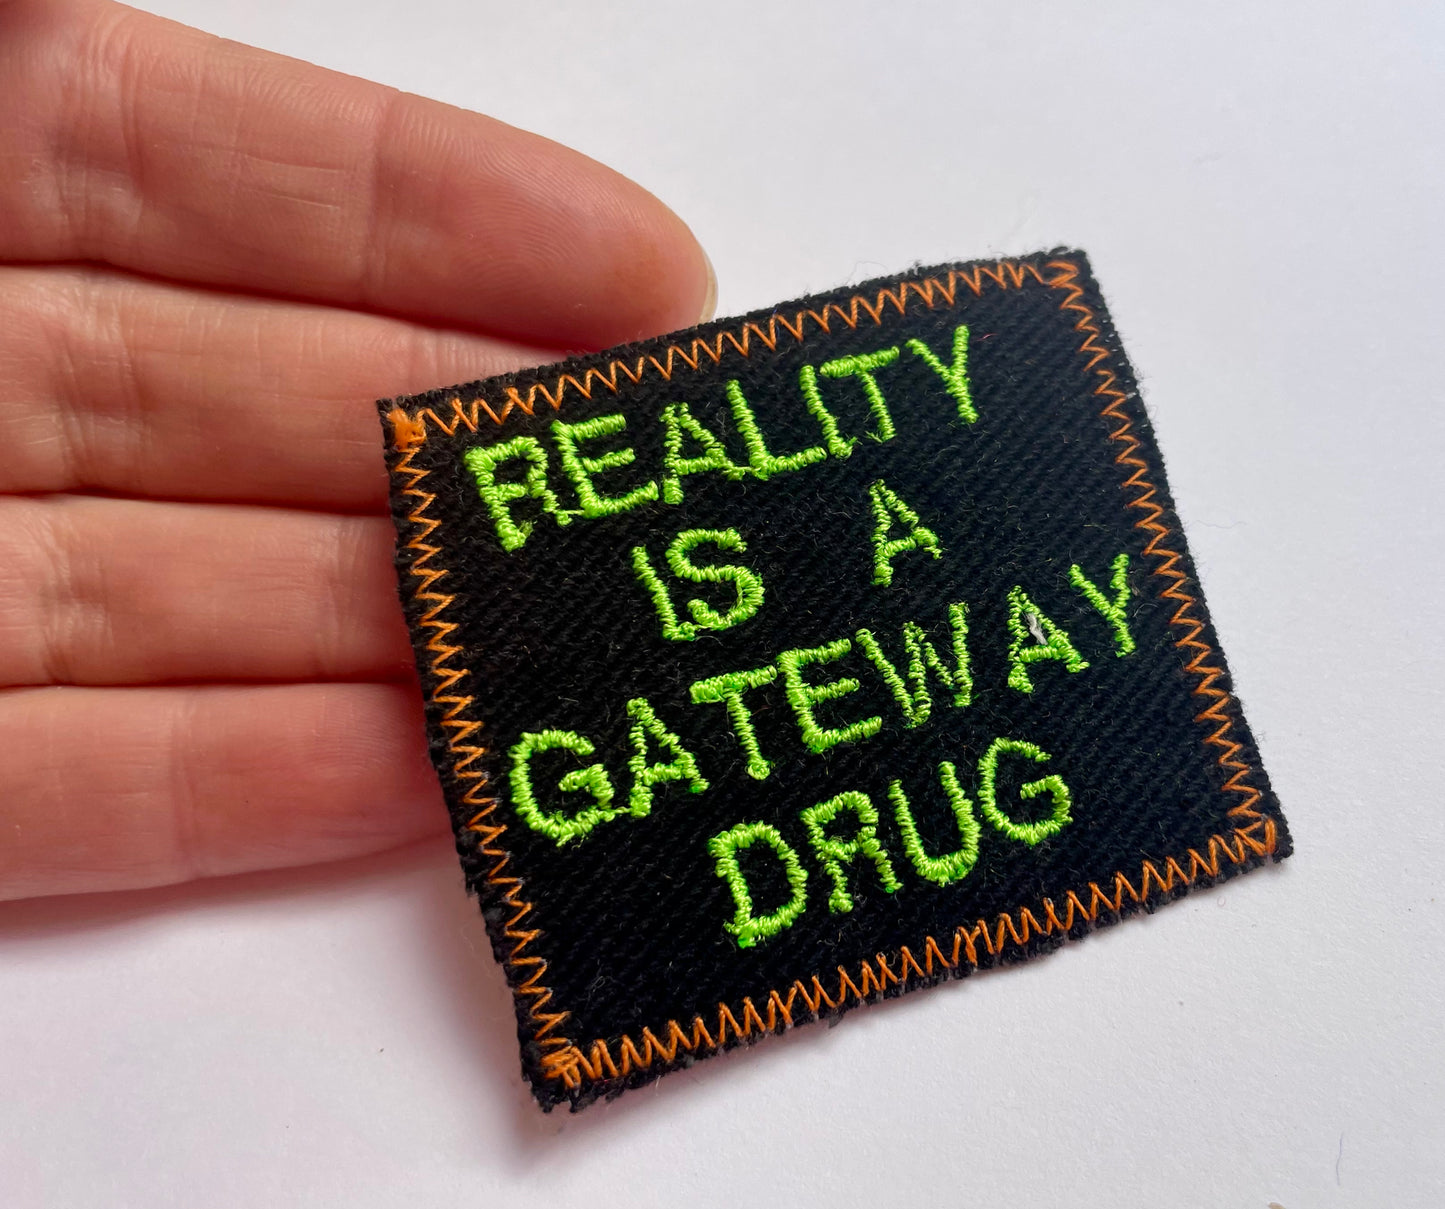 Reality Is a Gateway Drug - Handmade Canvas Upcycled Patch